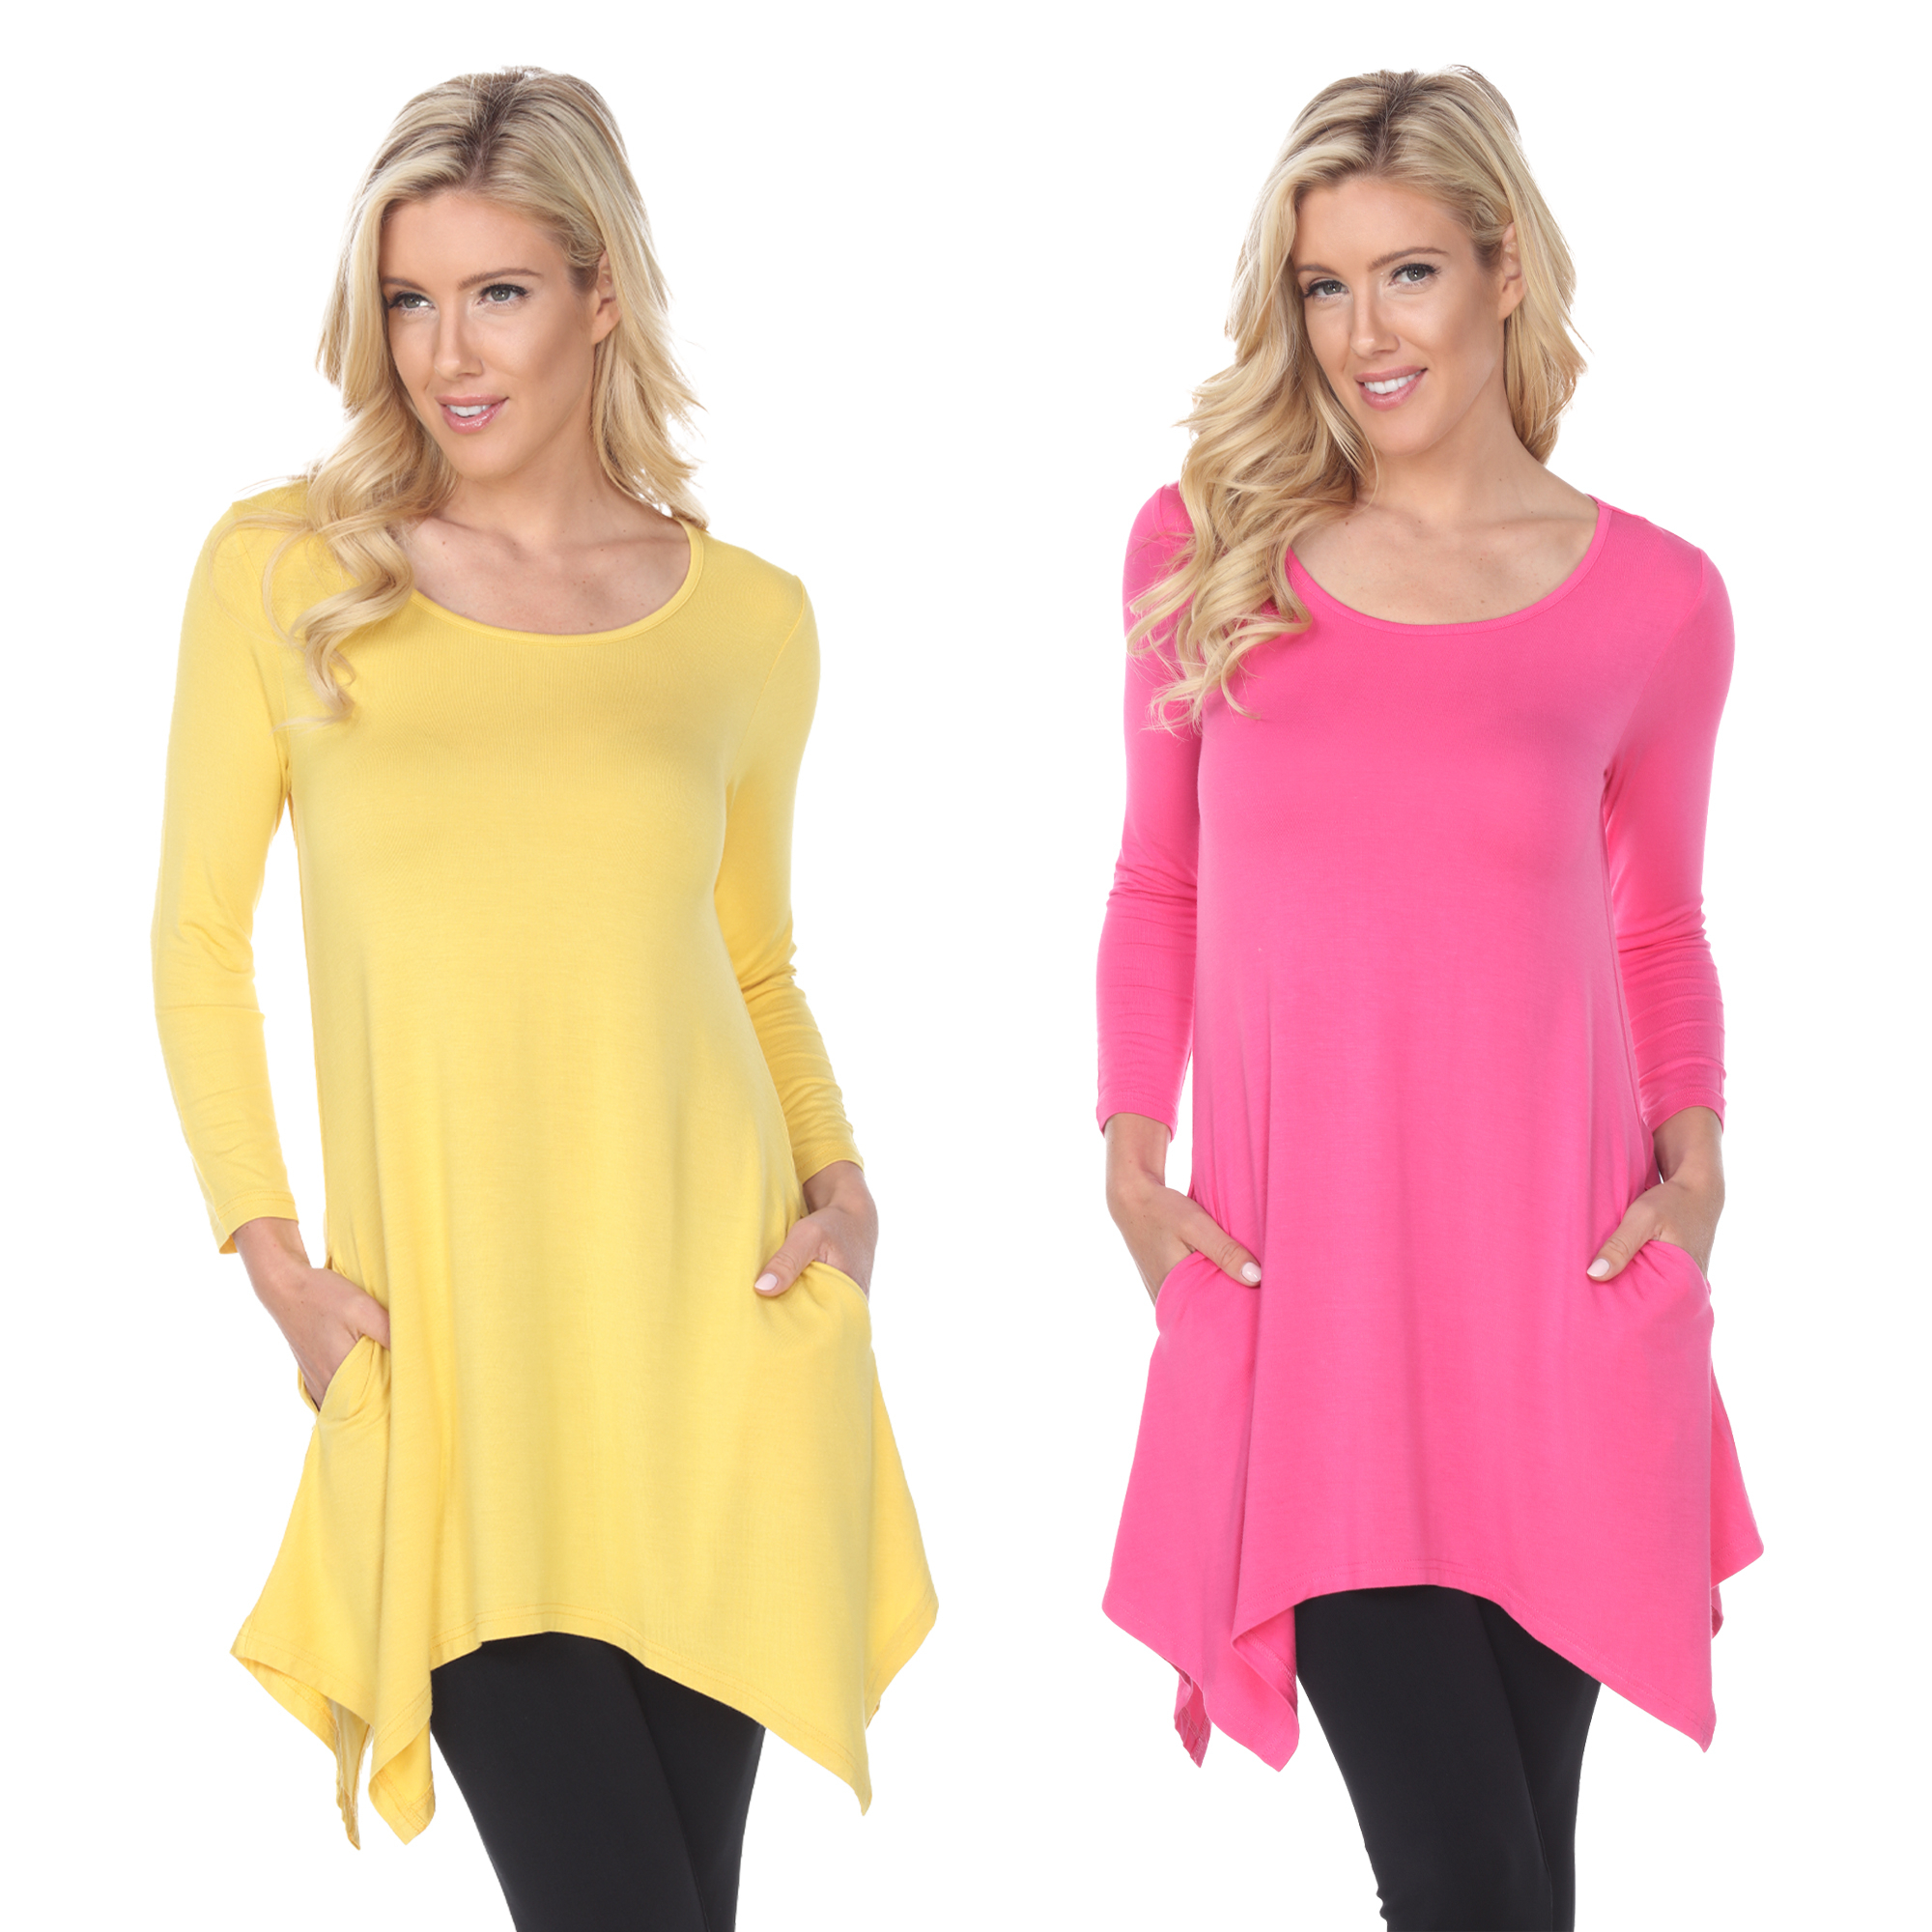 White Mark Women's Pack Of 2 Yellow Tunic Top - Yellow, Coral, 1X